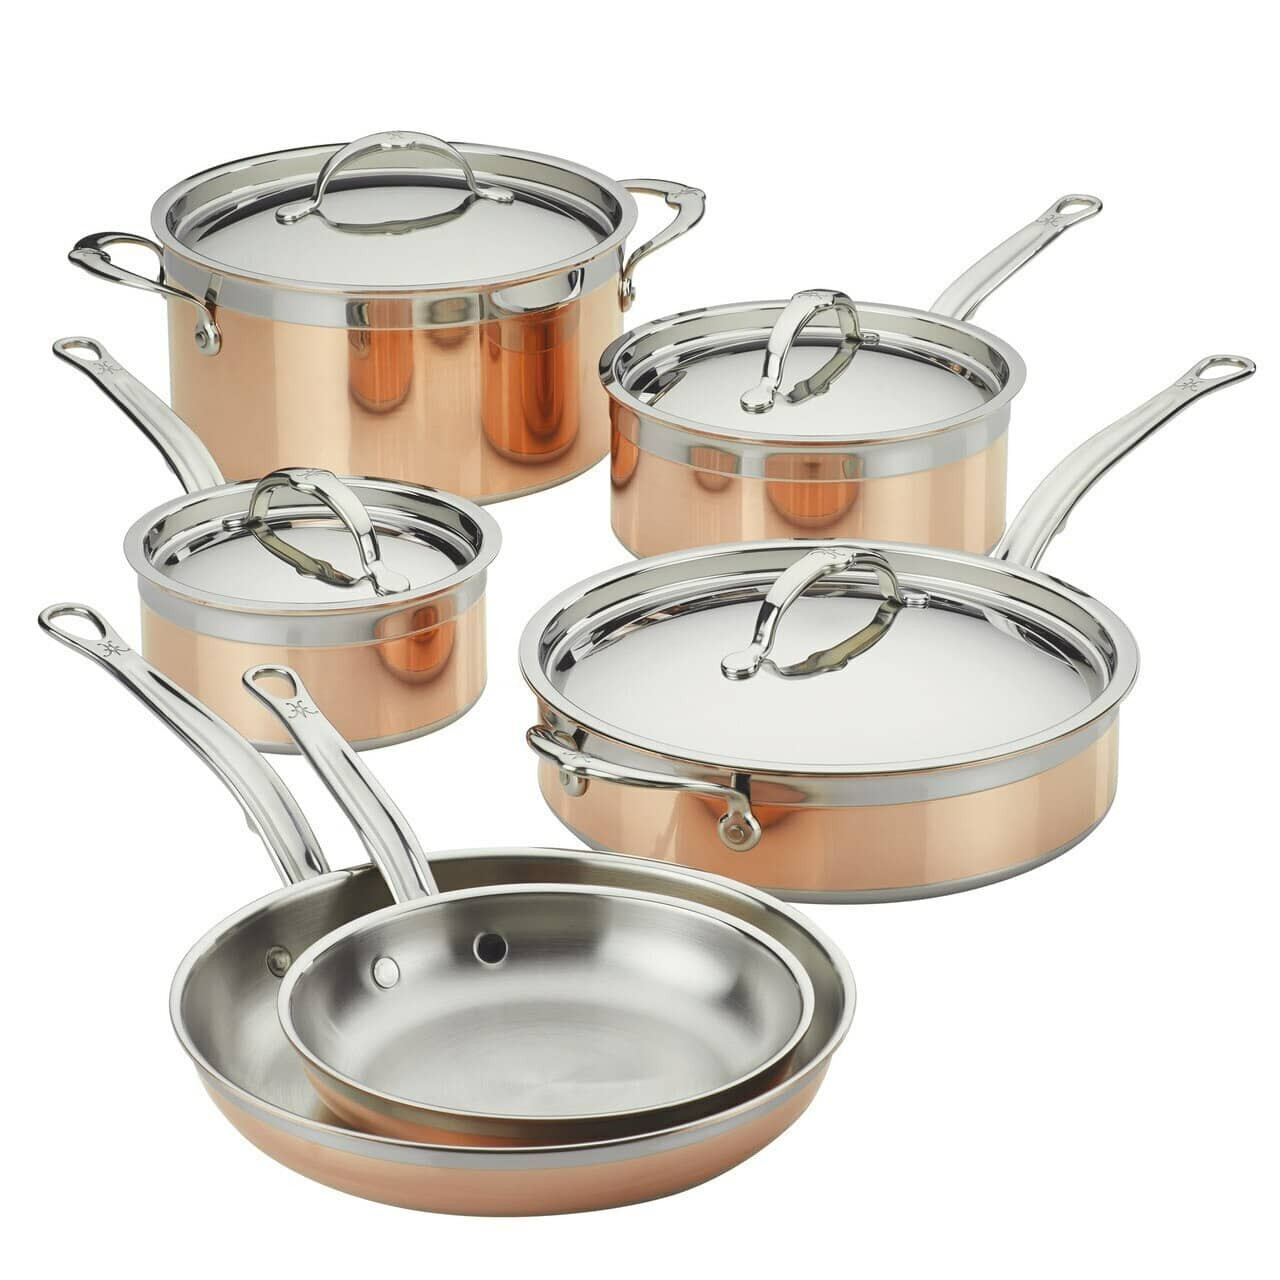 https://cdn11.bigcommerce.com/s-hccytny0od/images/stencil/1280x1280/products/3790/13920/hestan-copperbond-10pc-cookware-set__77444.1609656353.jpg?c=2?imbypass=on